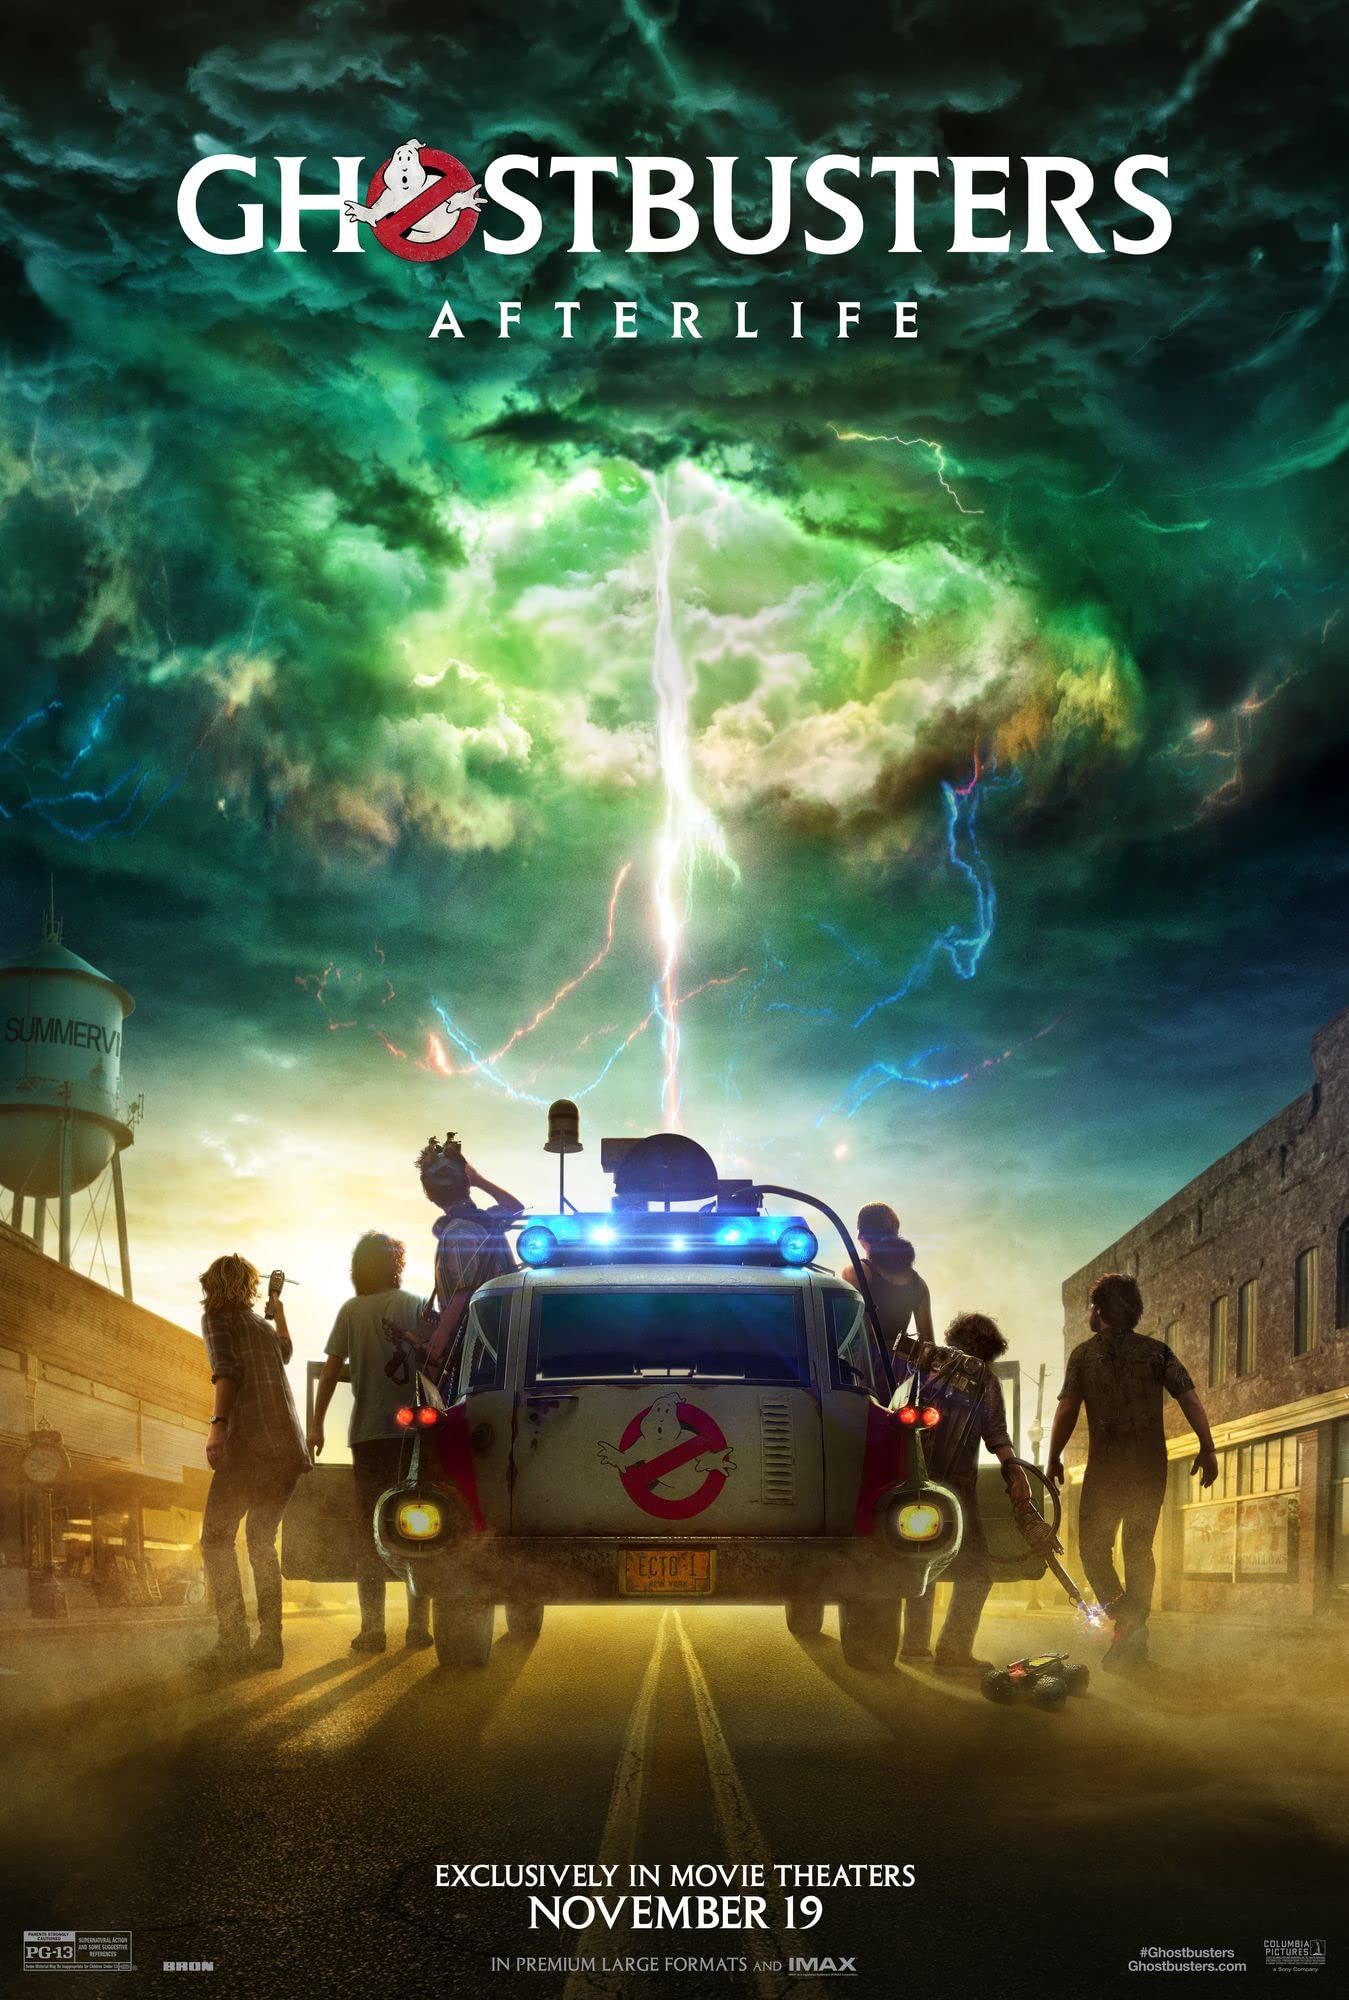 9. Ghostbusters: Afterlife